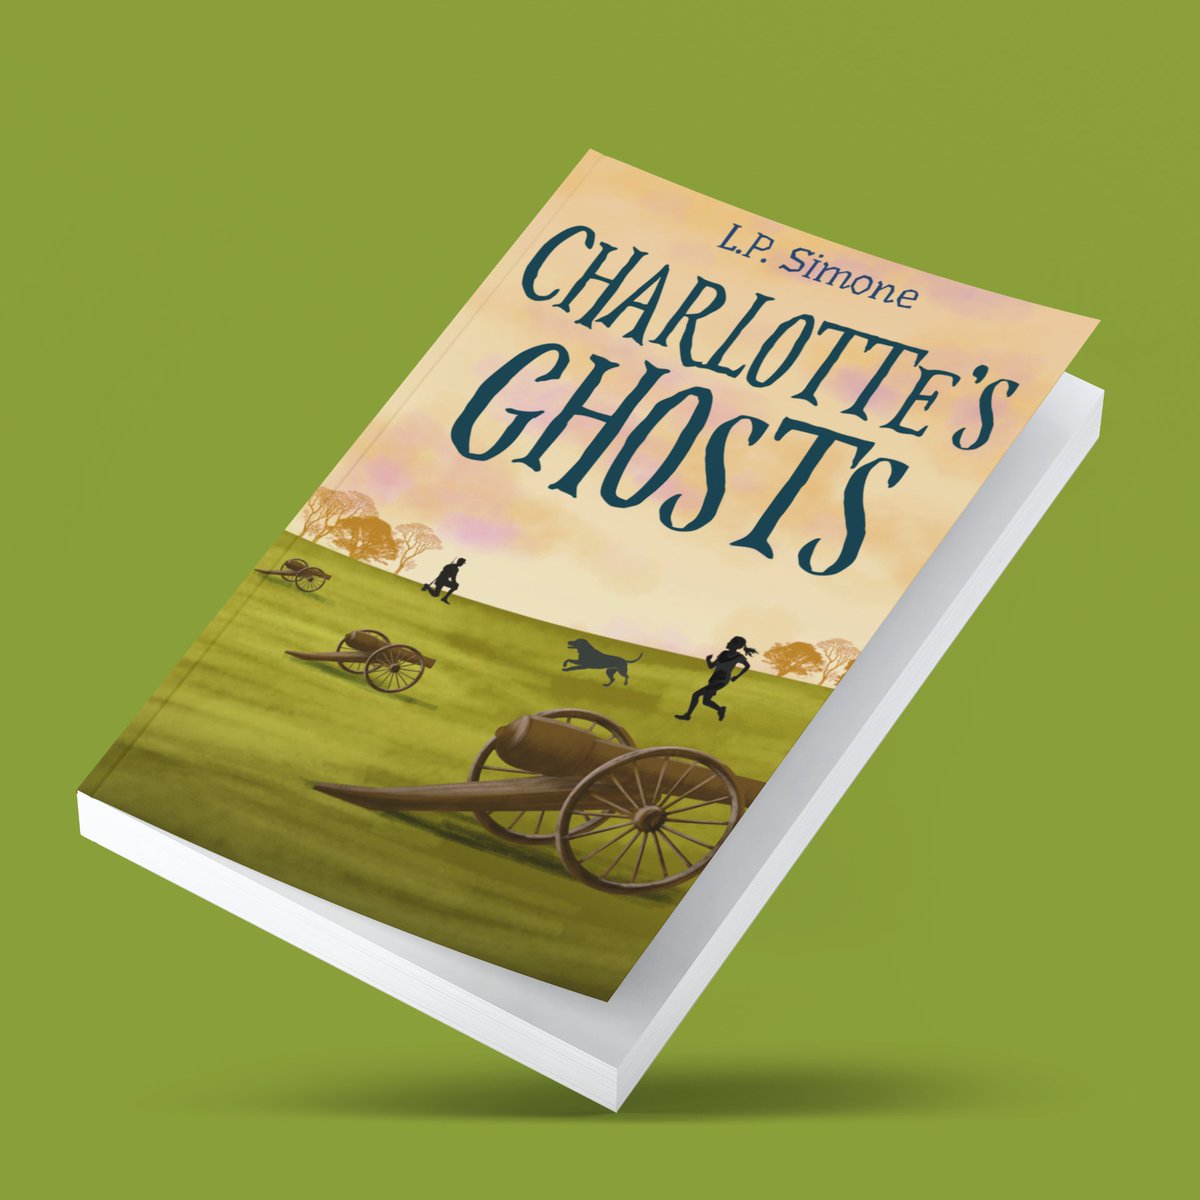 We're excited to share an amazing title by @lpsimone!

Charlotte's Ghosts: The Mystery of the Vanishing Boy was written to explore the nature of grief and how love's bonds never fade.

Get your copy today: amazon.com/Charlottes-Gho…

#writingcommunity #bookboost #writerslift